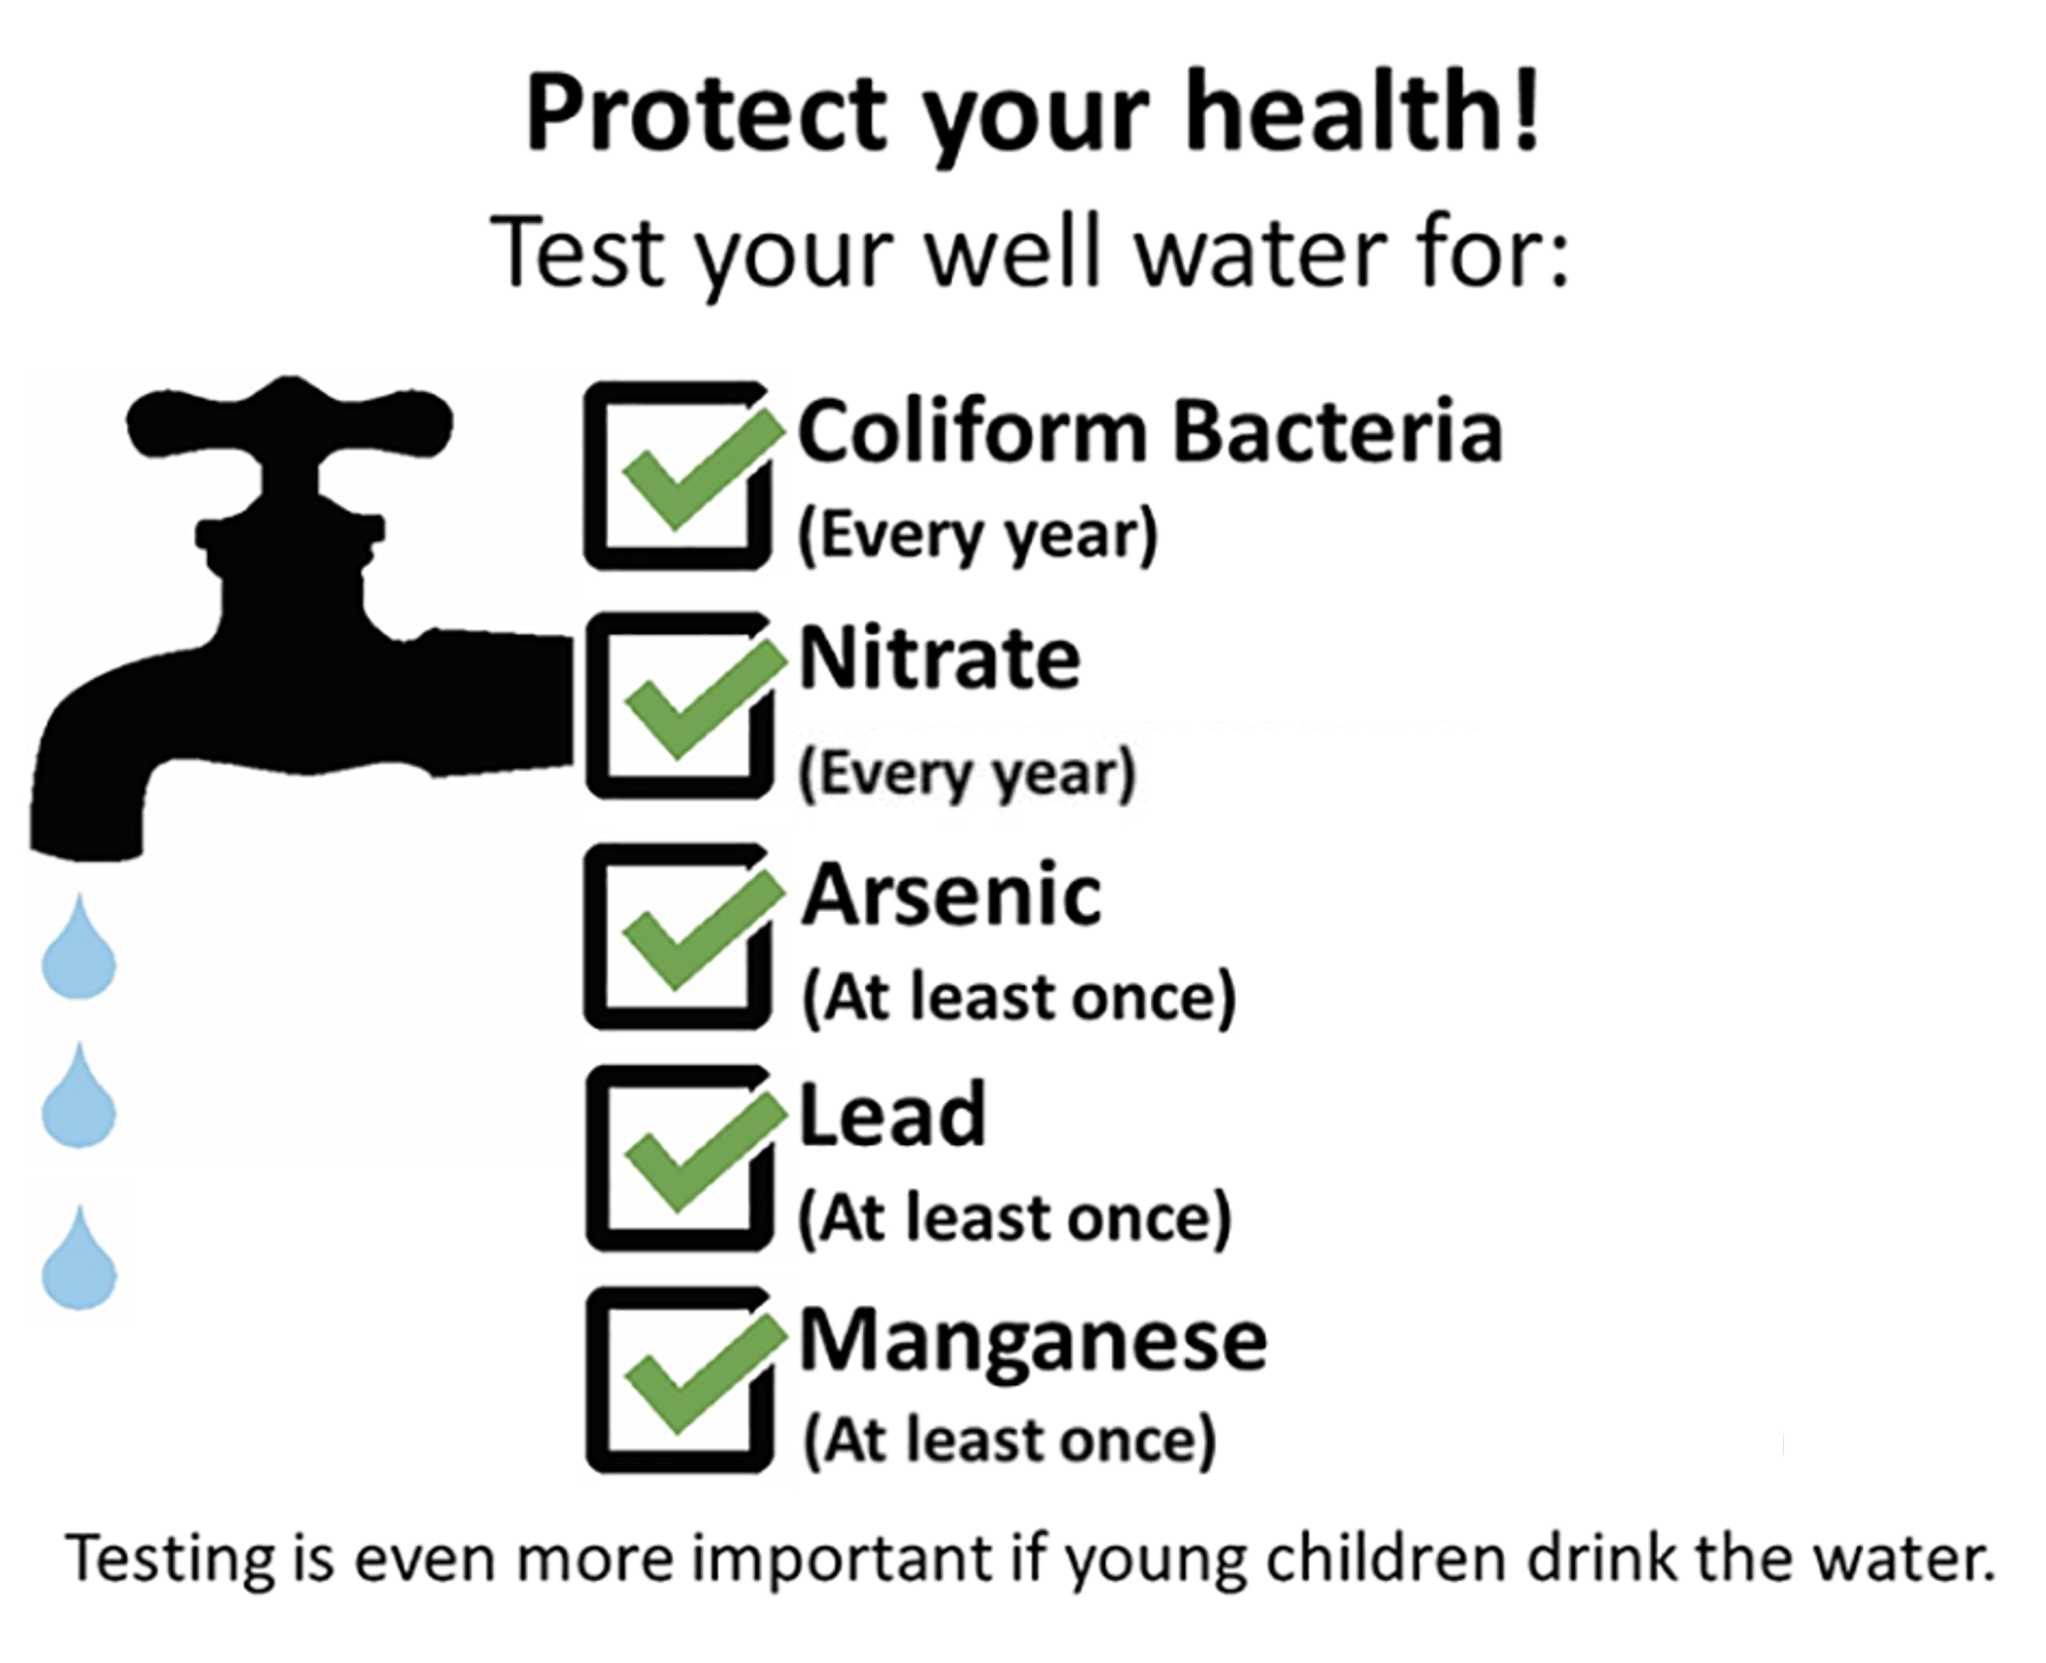 Protect your health! Test your well water for: Coliform Bacteria every year, Nitrate every other year, arsenic, at least once, lead at least once, and manganese before a baby drinks the water. Testing is even more important if young children drink the water.